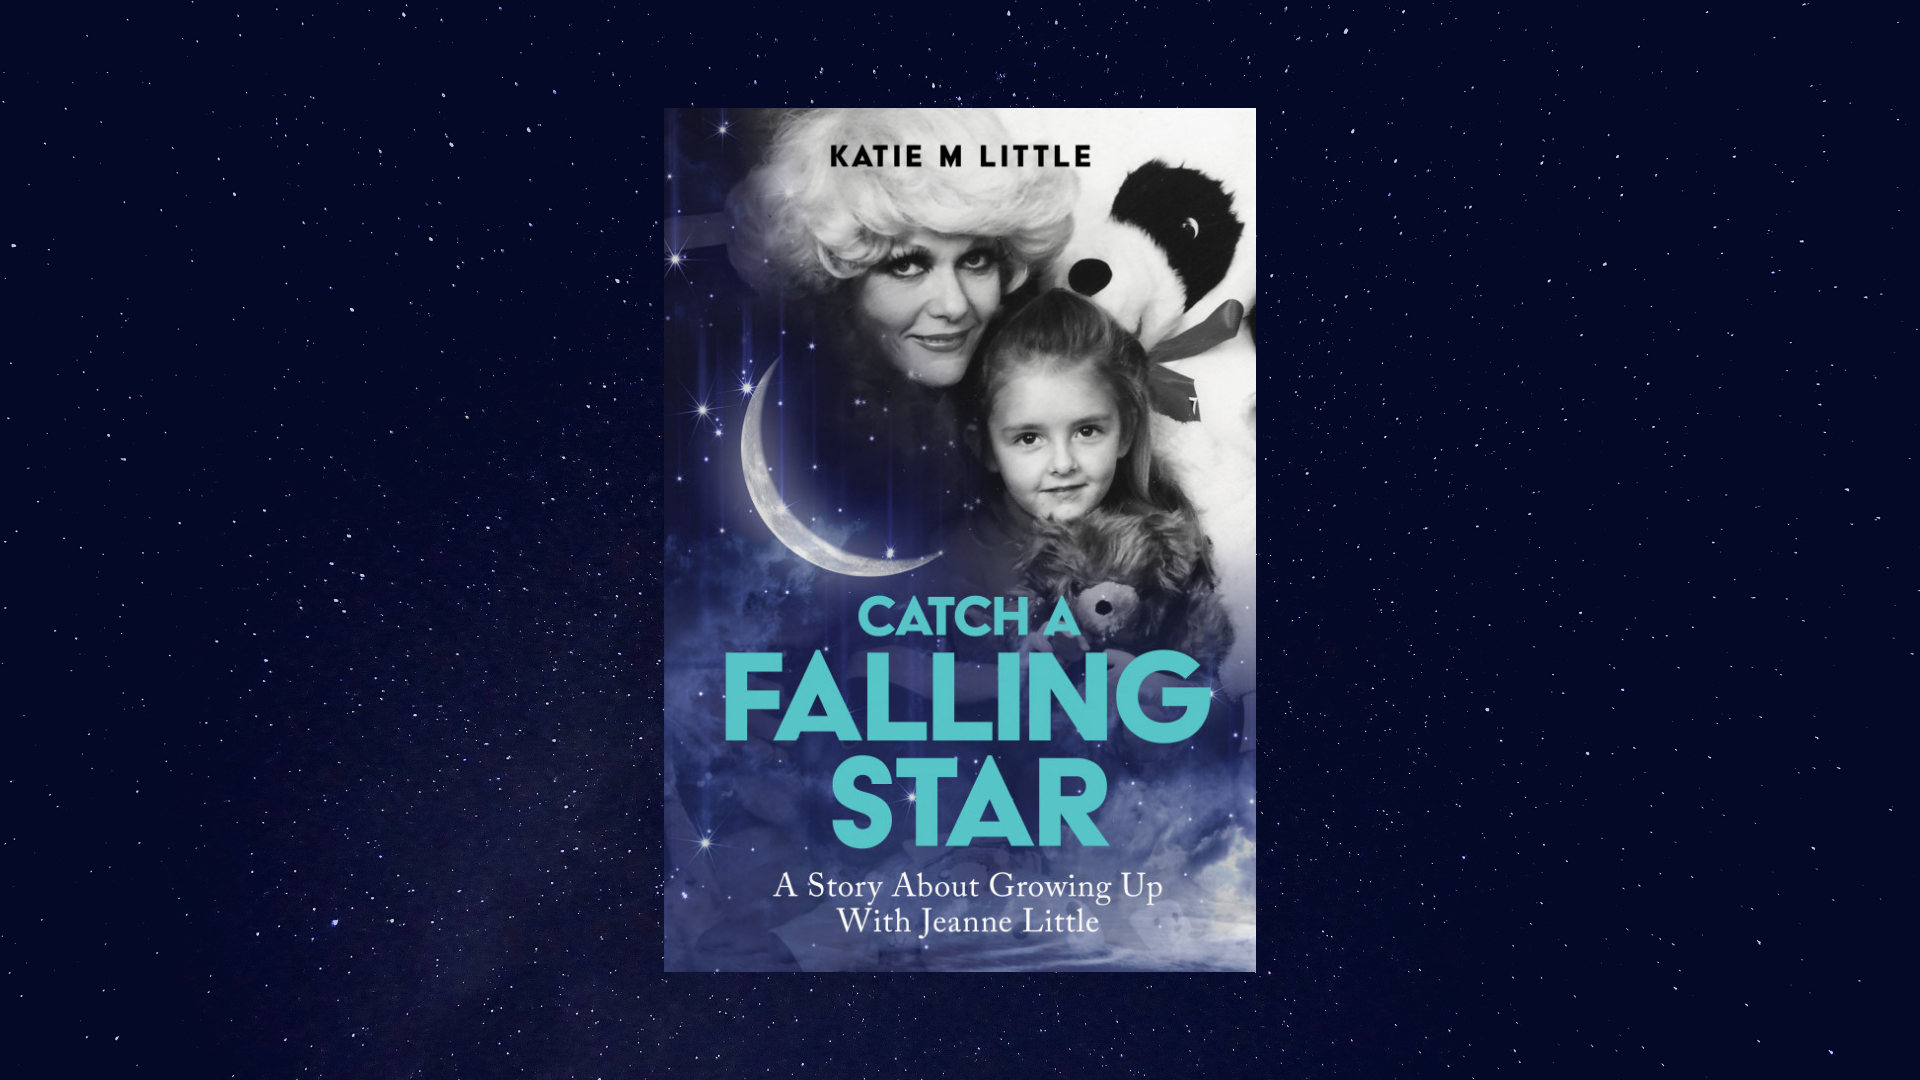 Book Review Katie Little S Catch A Falling Star Shares The Story Of Growing Up With The Much Loved Jeanne Little The Au Review